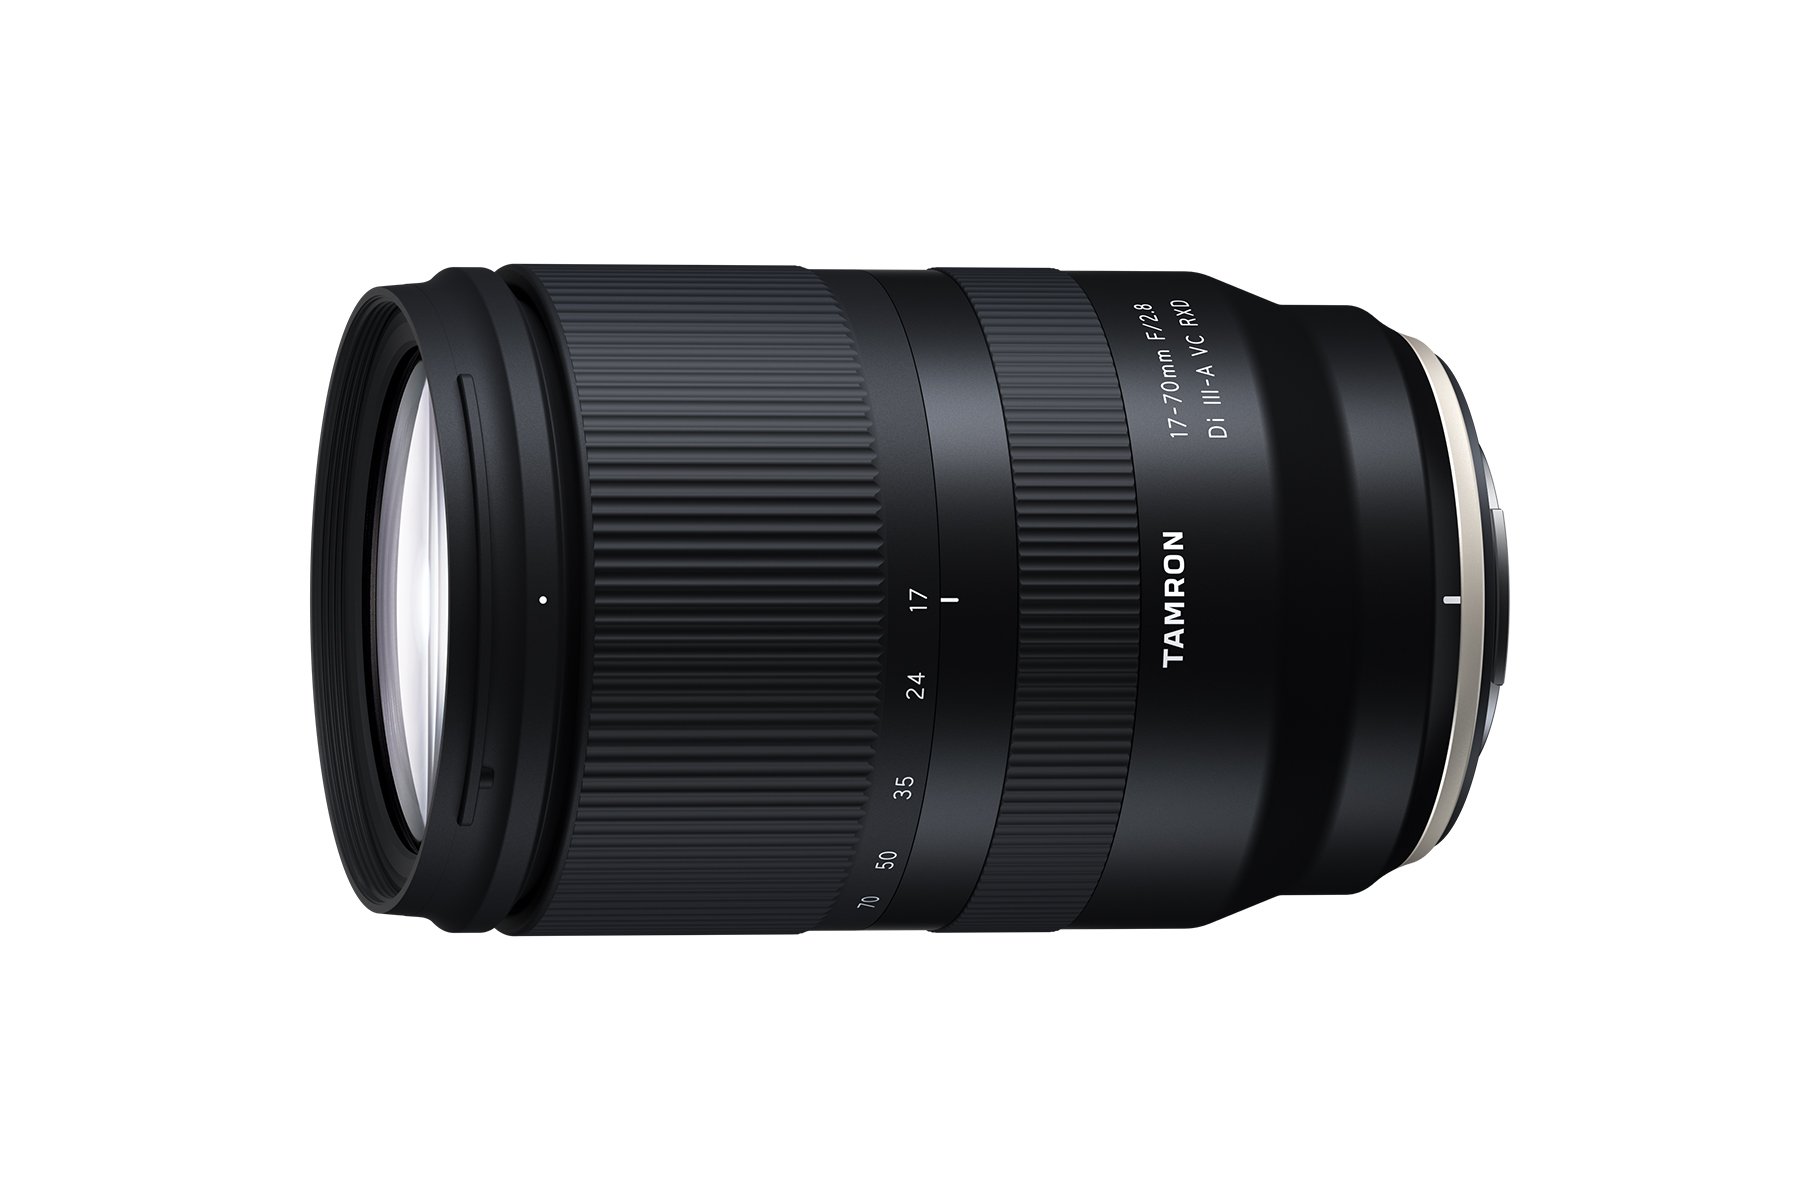 The New Tamron 17-70mm f2.8 Looks Irresistibly Versatile and Valuable